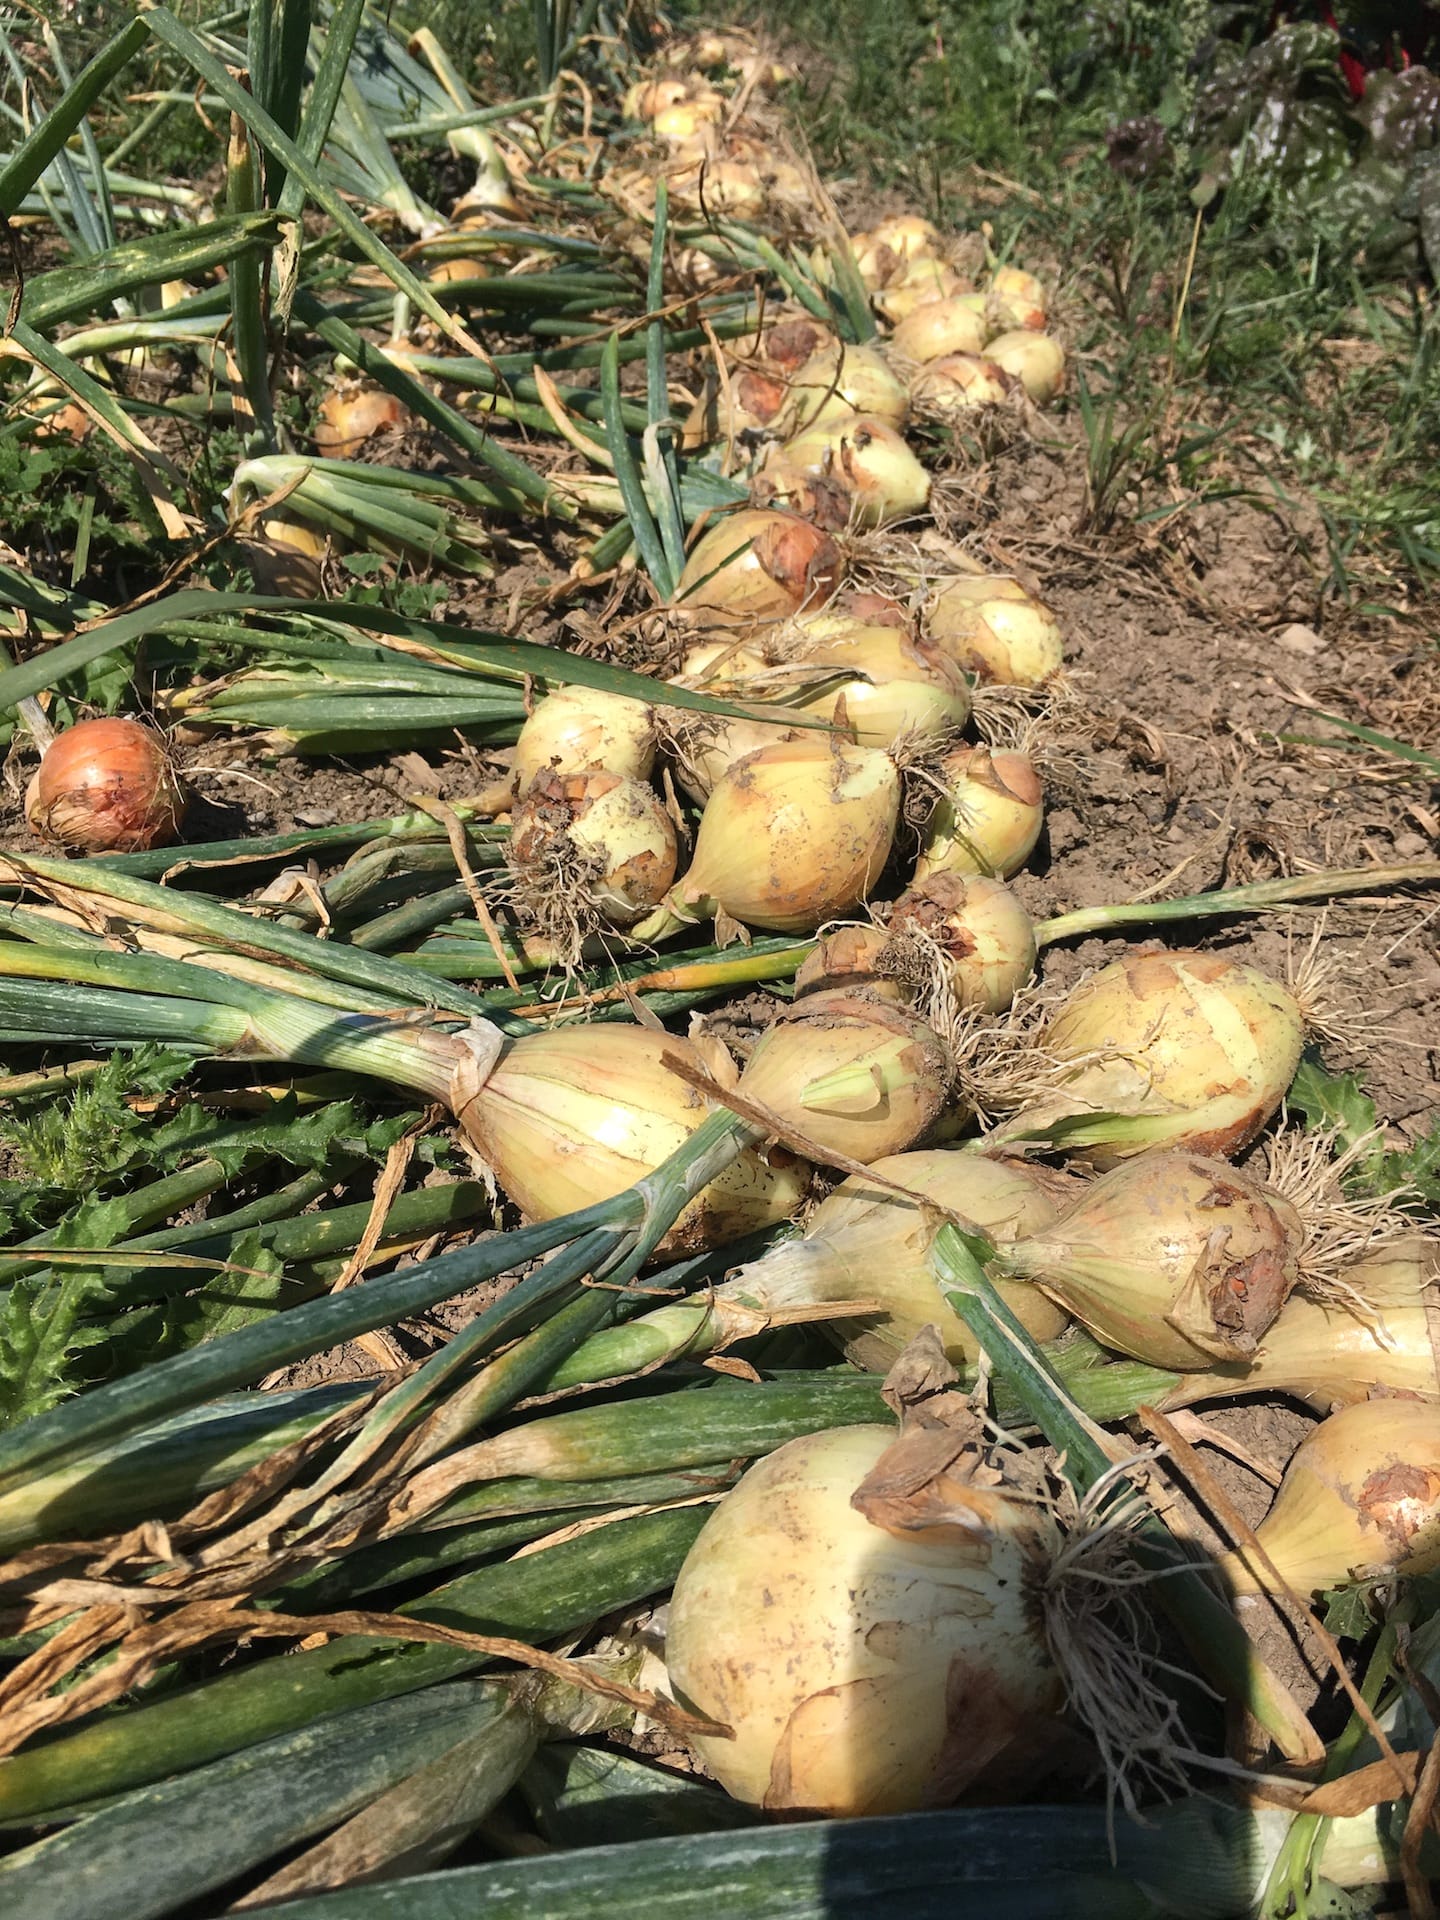 Organic Onions in the Dirt